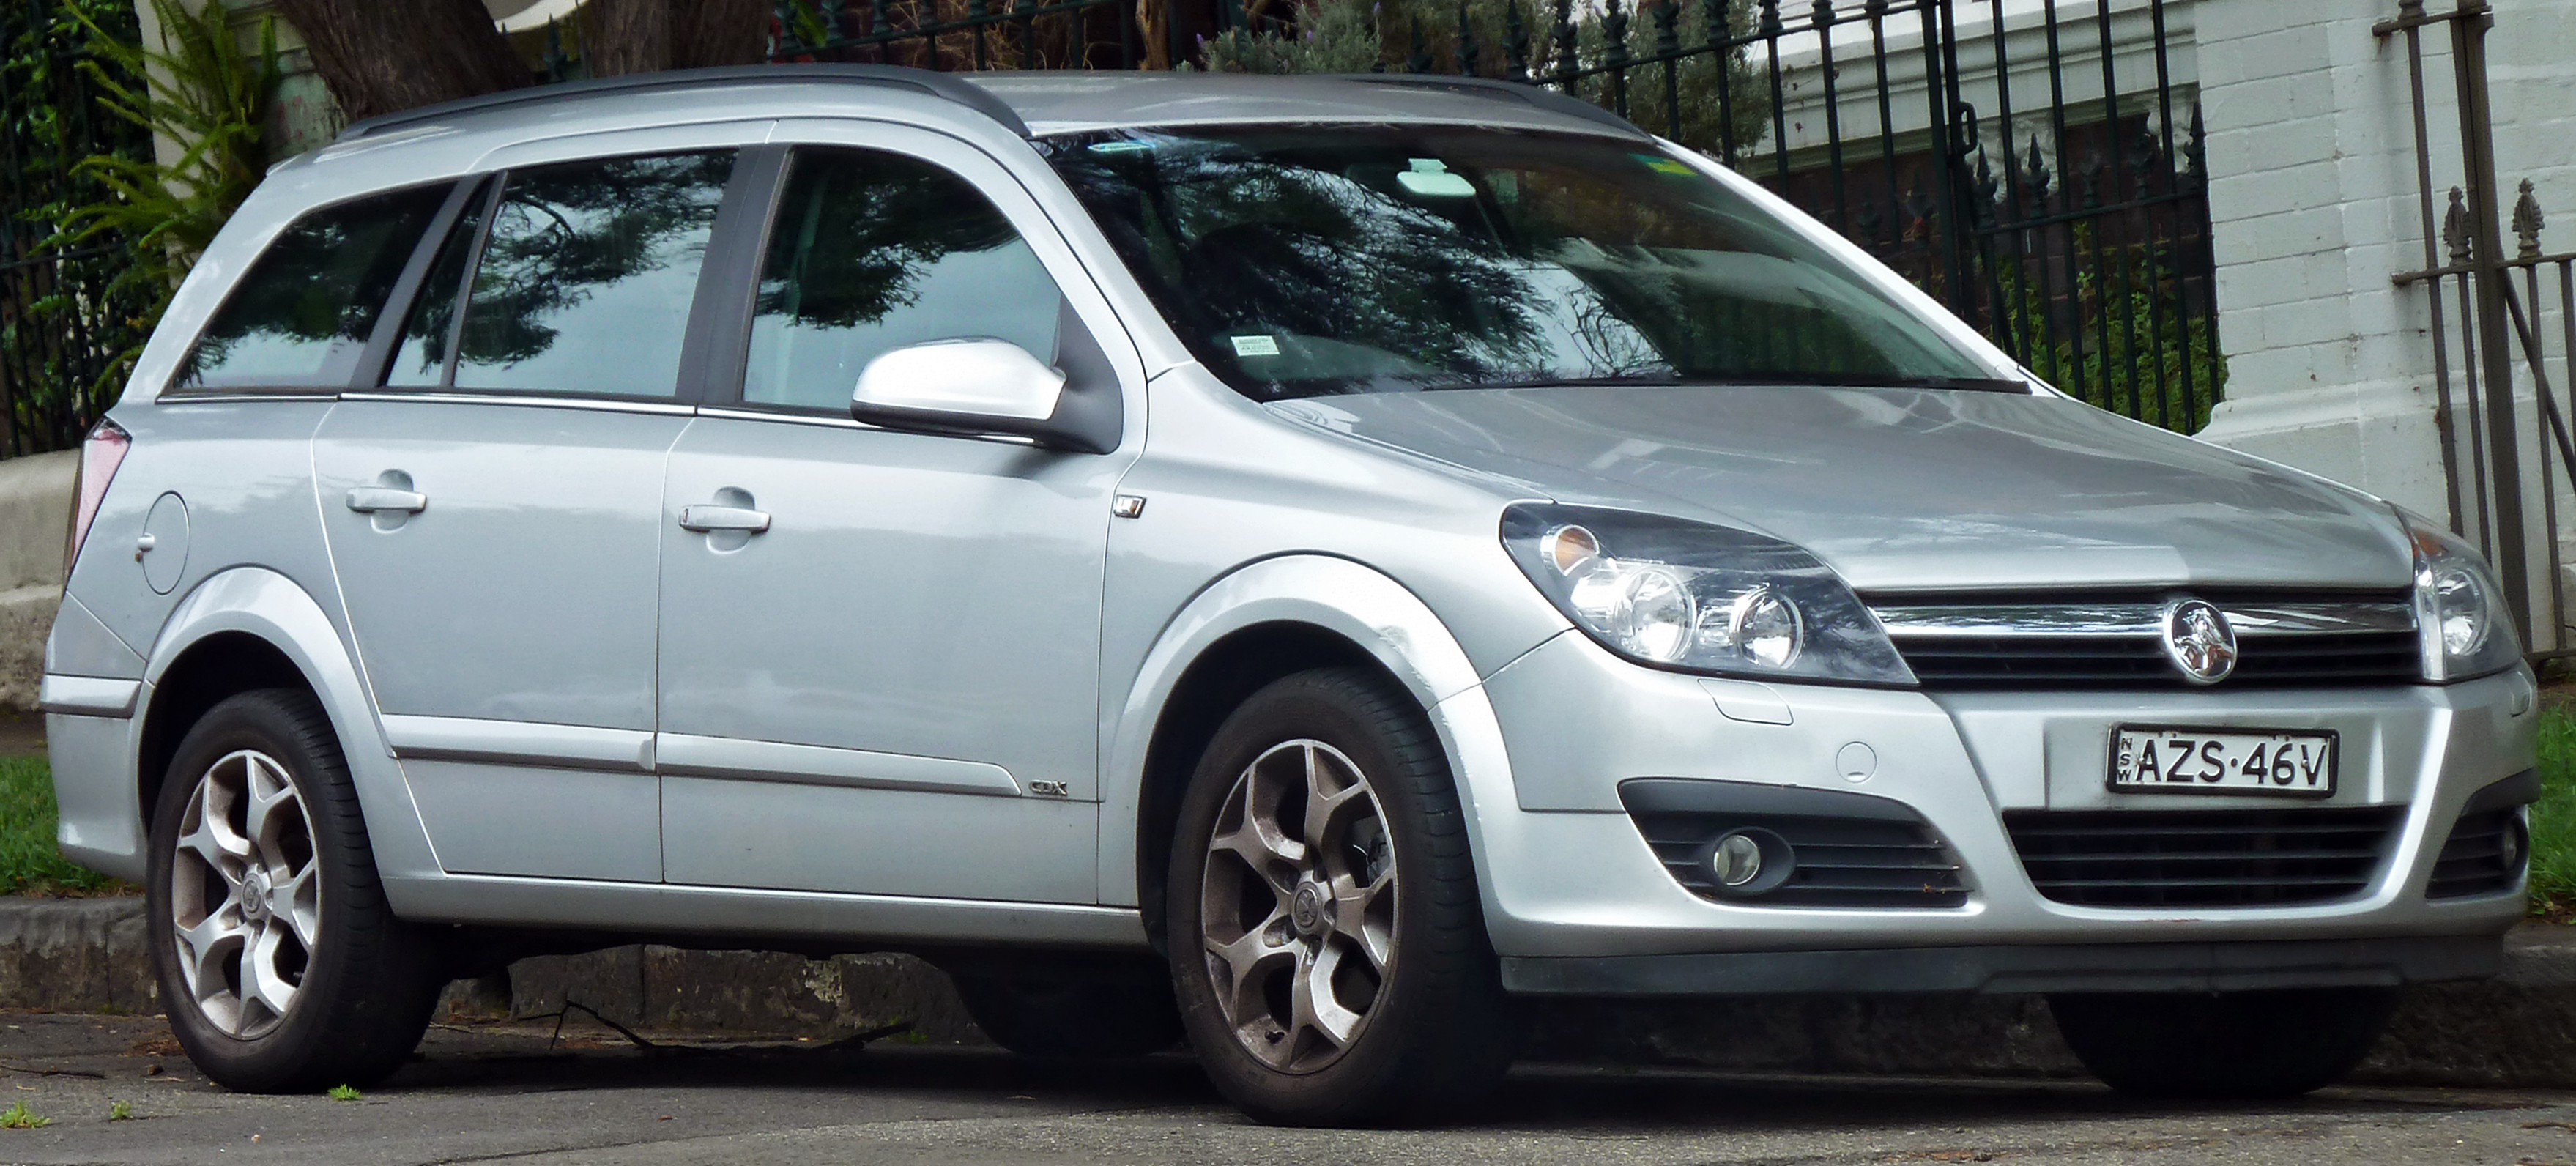 2006-2007 Holden AH Astra CDX station wagon (2011-01-13)